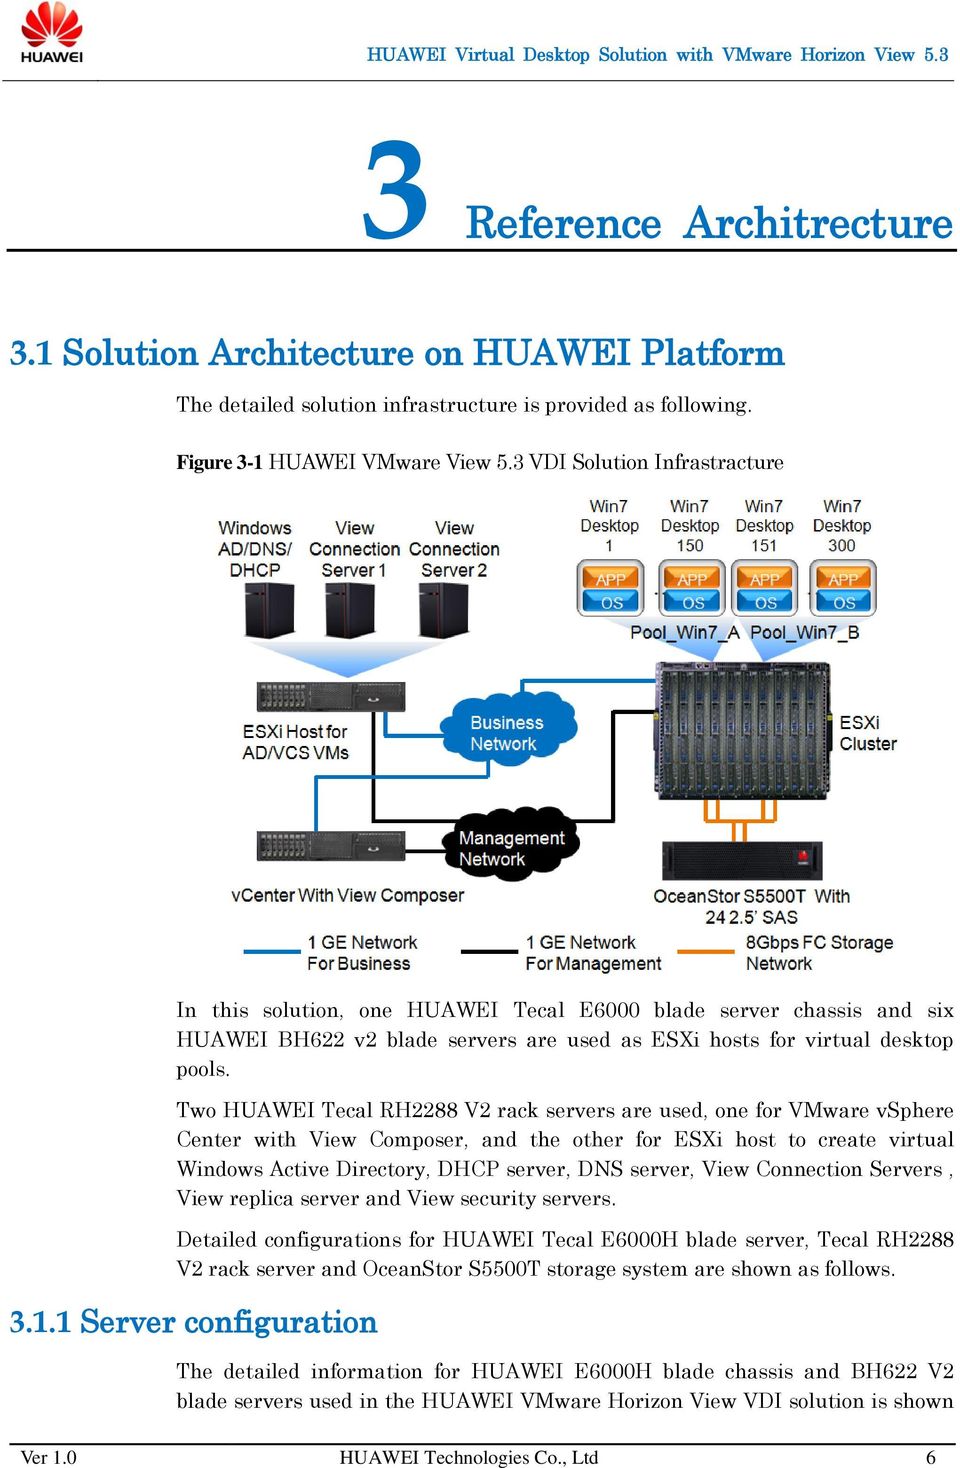 Two HUAWEI Tecal RH2288 V2 rack servers are used, one for VMware vsphere Center with View Composer, and the other for ESXi host to create virtual Windows Active Directory, DHCP server, DNS server,